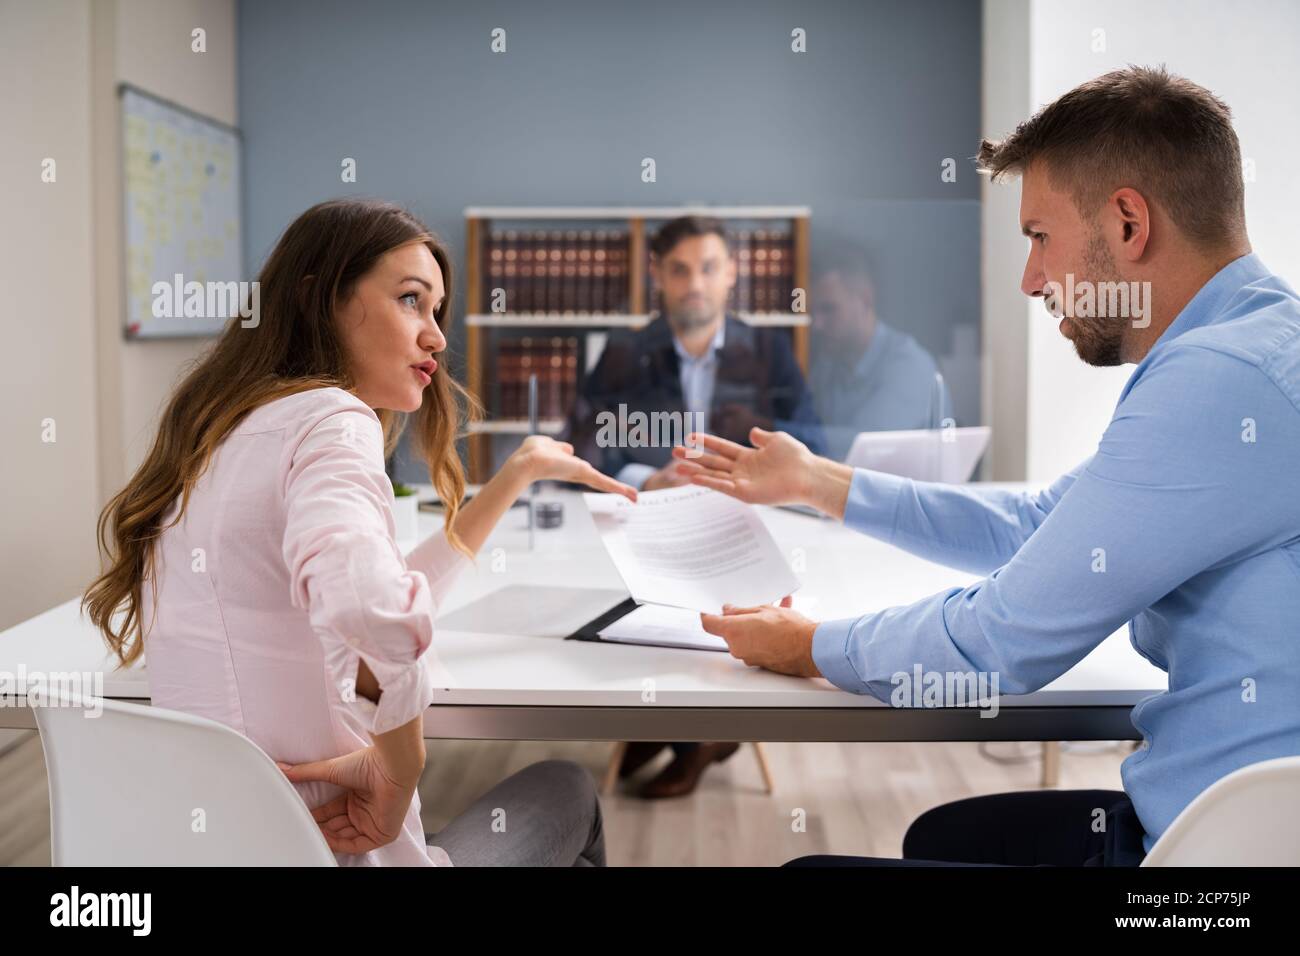 Angry Family Dispute With Lawyer In Court Wearing Face Masks Stock Photo